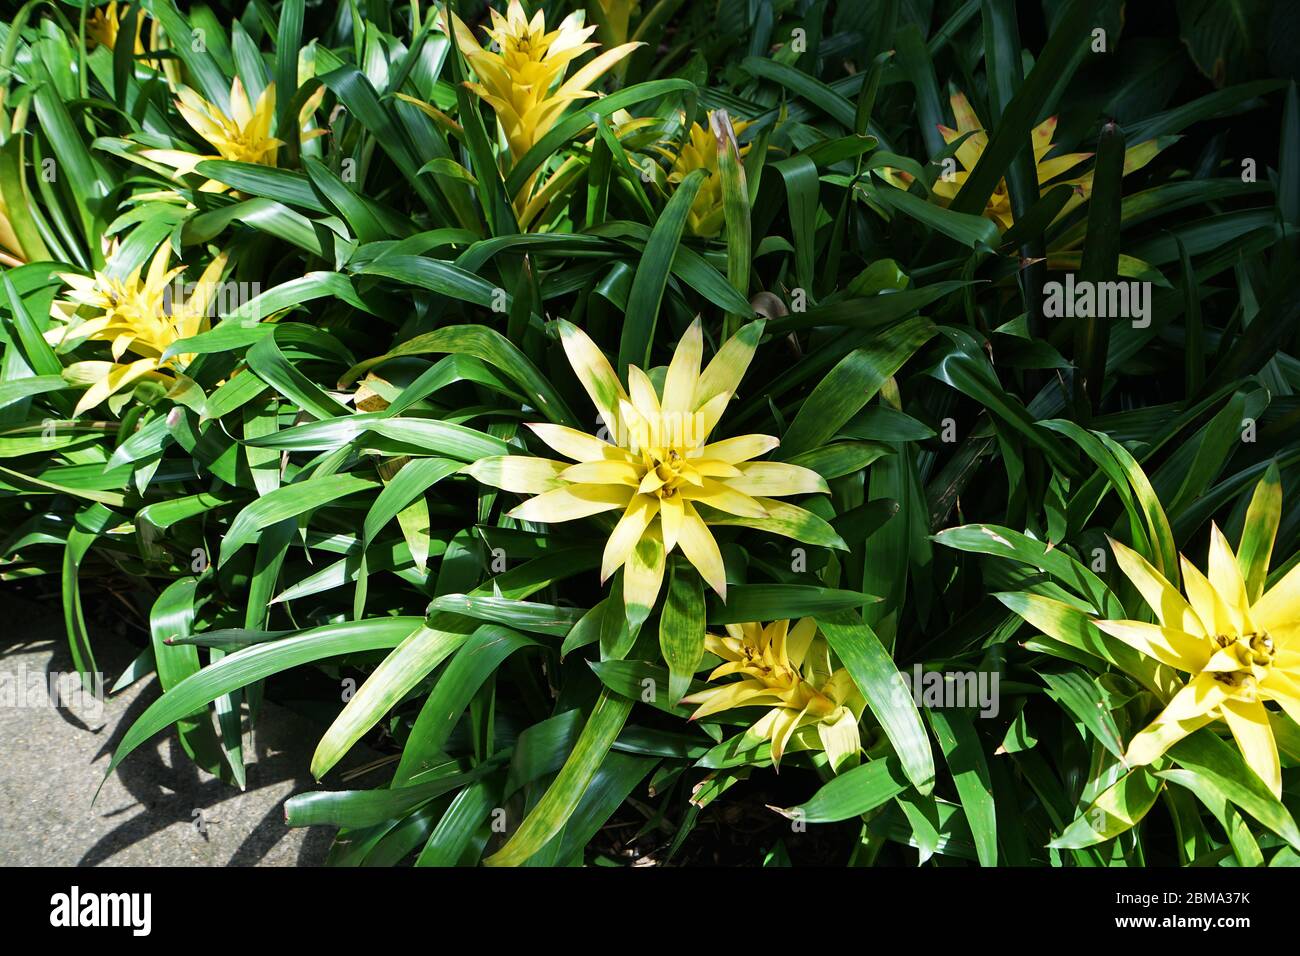 Yellow Bromeliaceae (bromeliads) plants, monocot flowering plants mainly found in tropical Americas Stock Photo